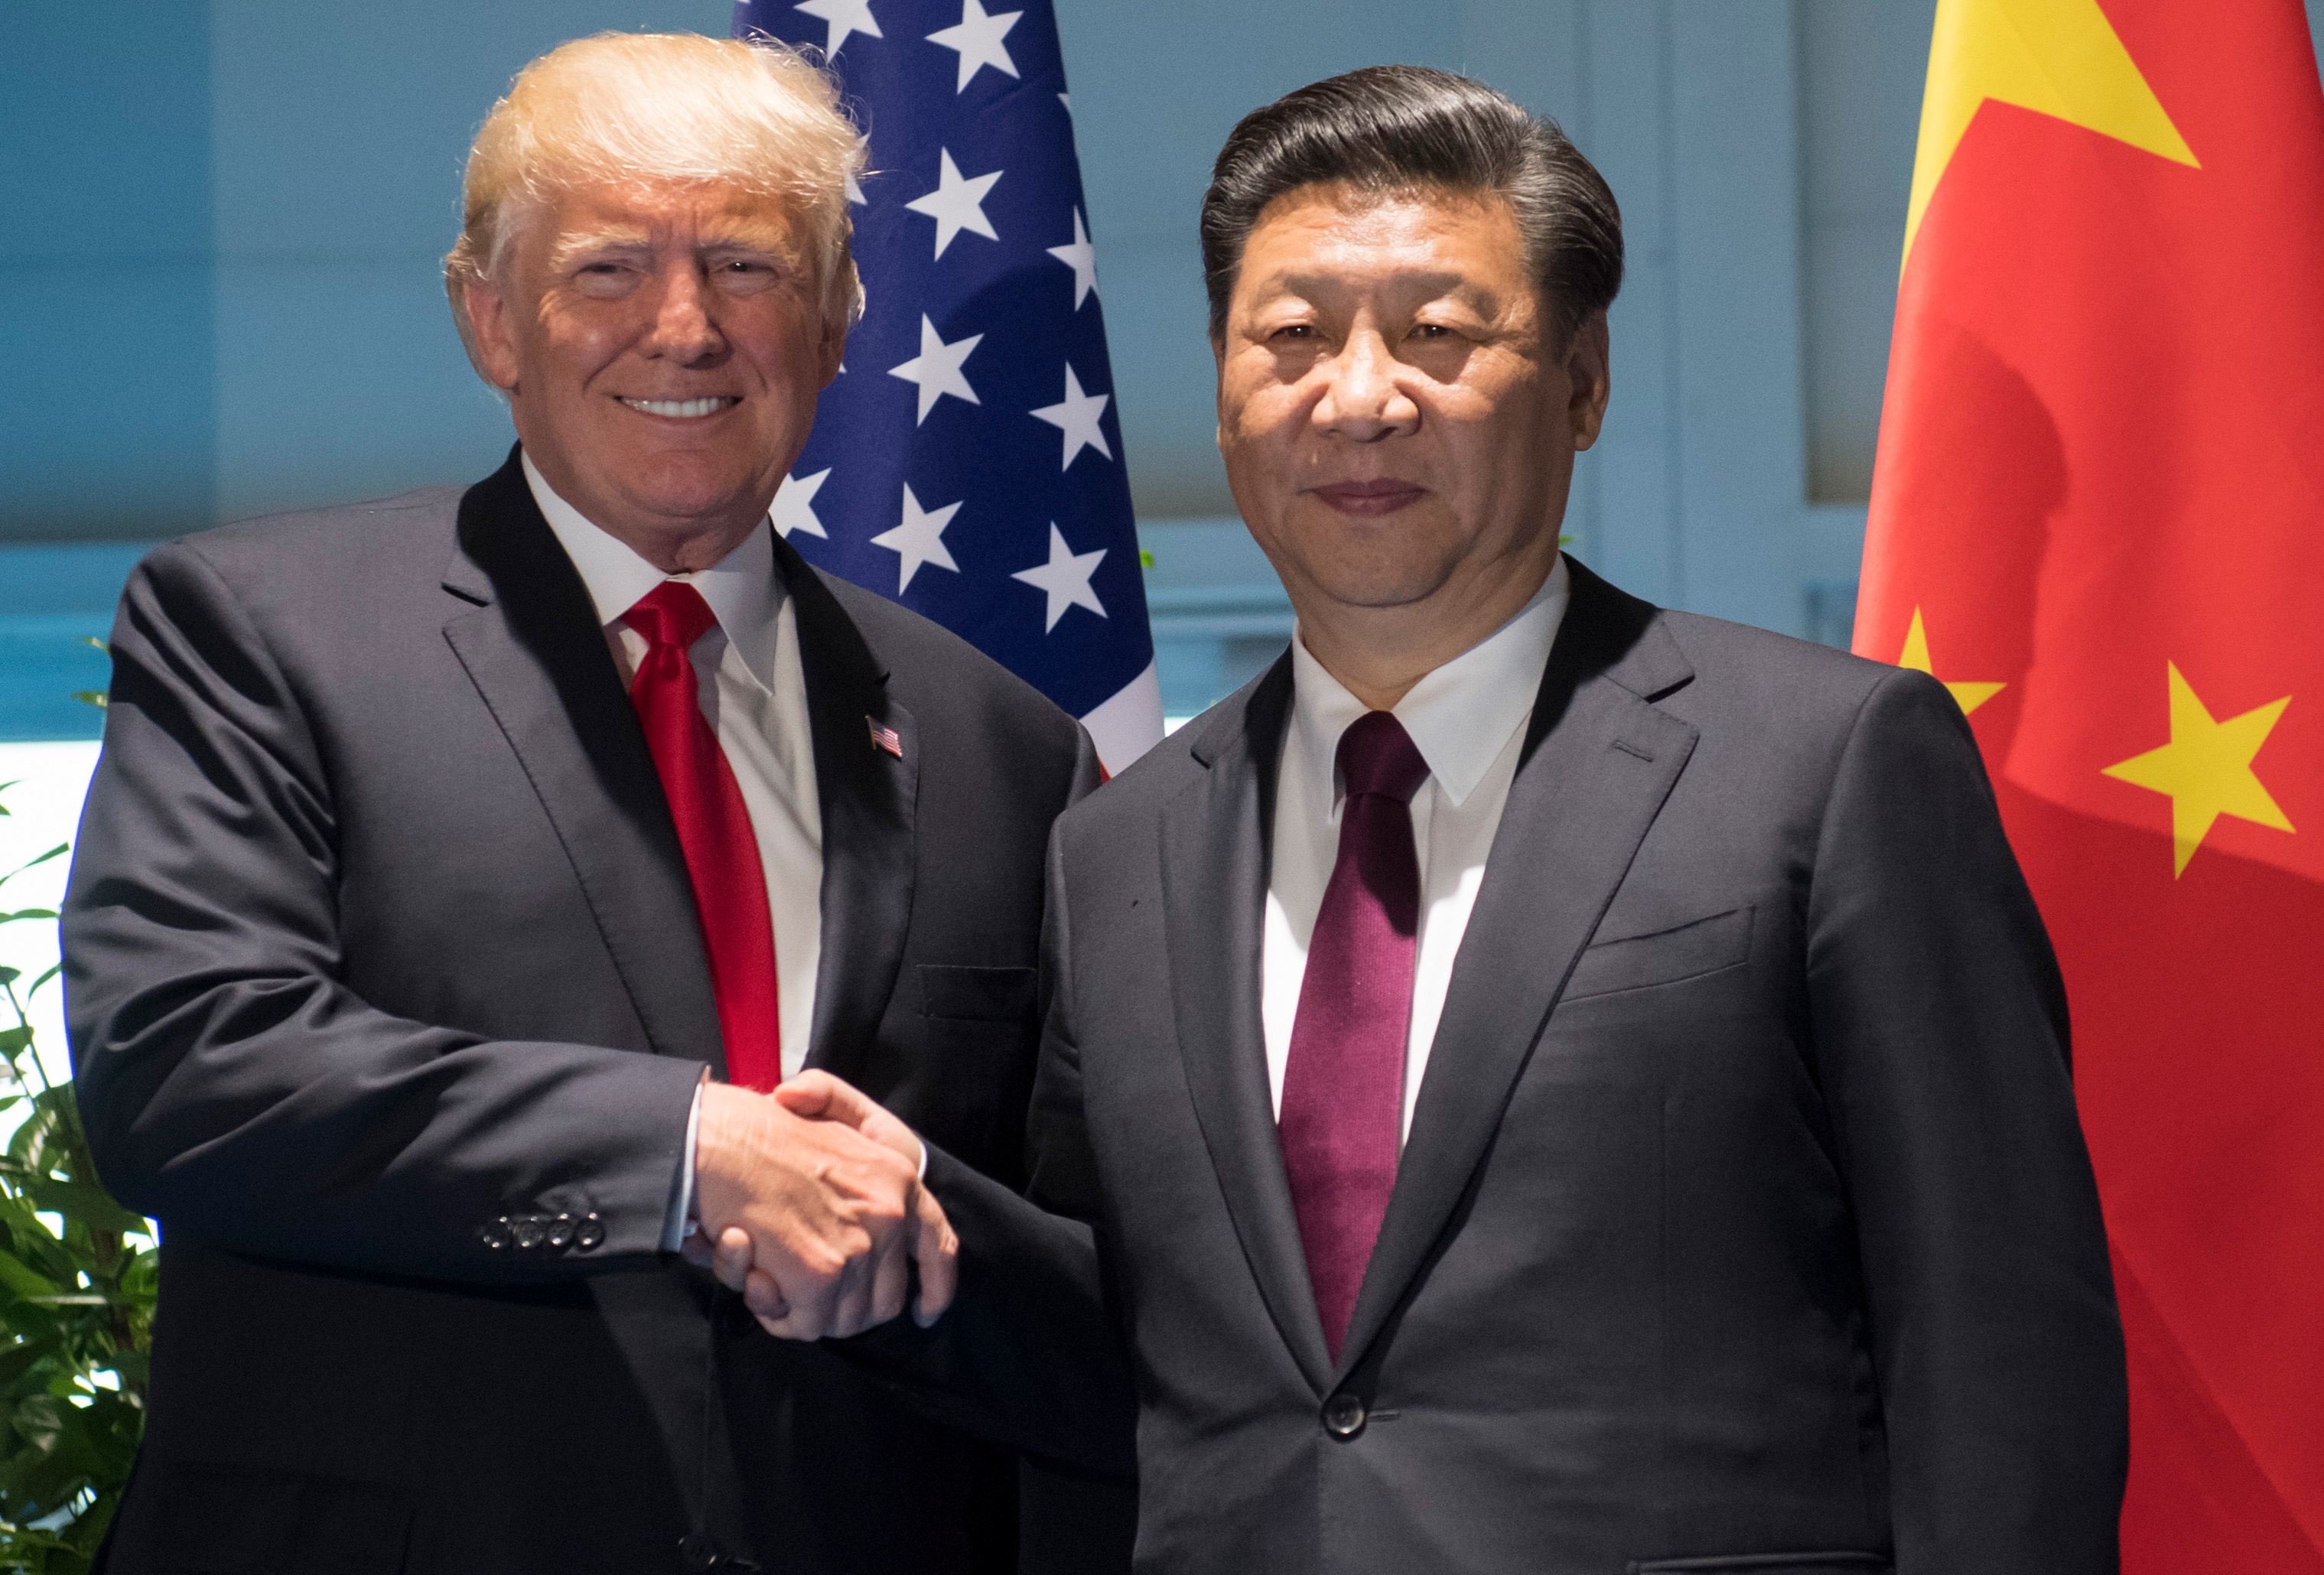 US President Donald Trump and Chinese President Xi Jinping (R) shake hands prior to a meeting on the sidelines of the G20 Summit in Hamburg, Germany, July 8, 2017. (SAUL LOEB&mdash;AFP/Getty Images)